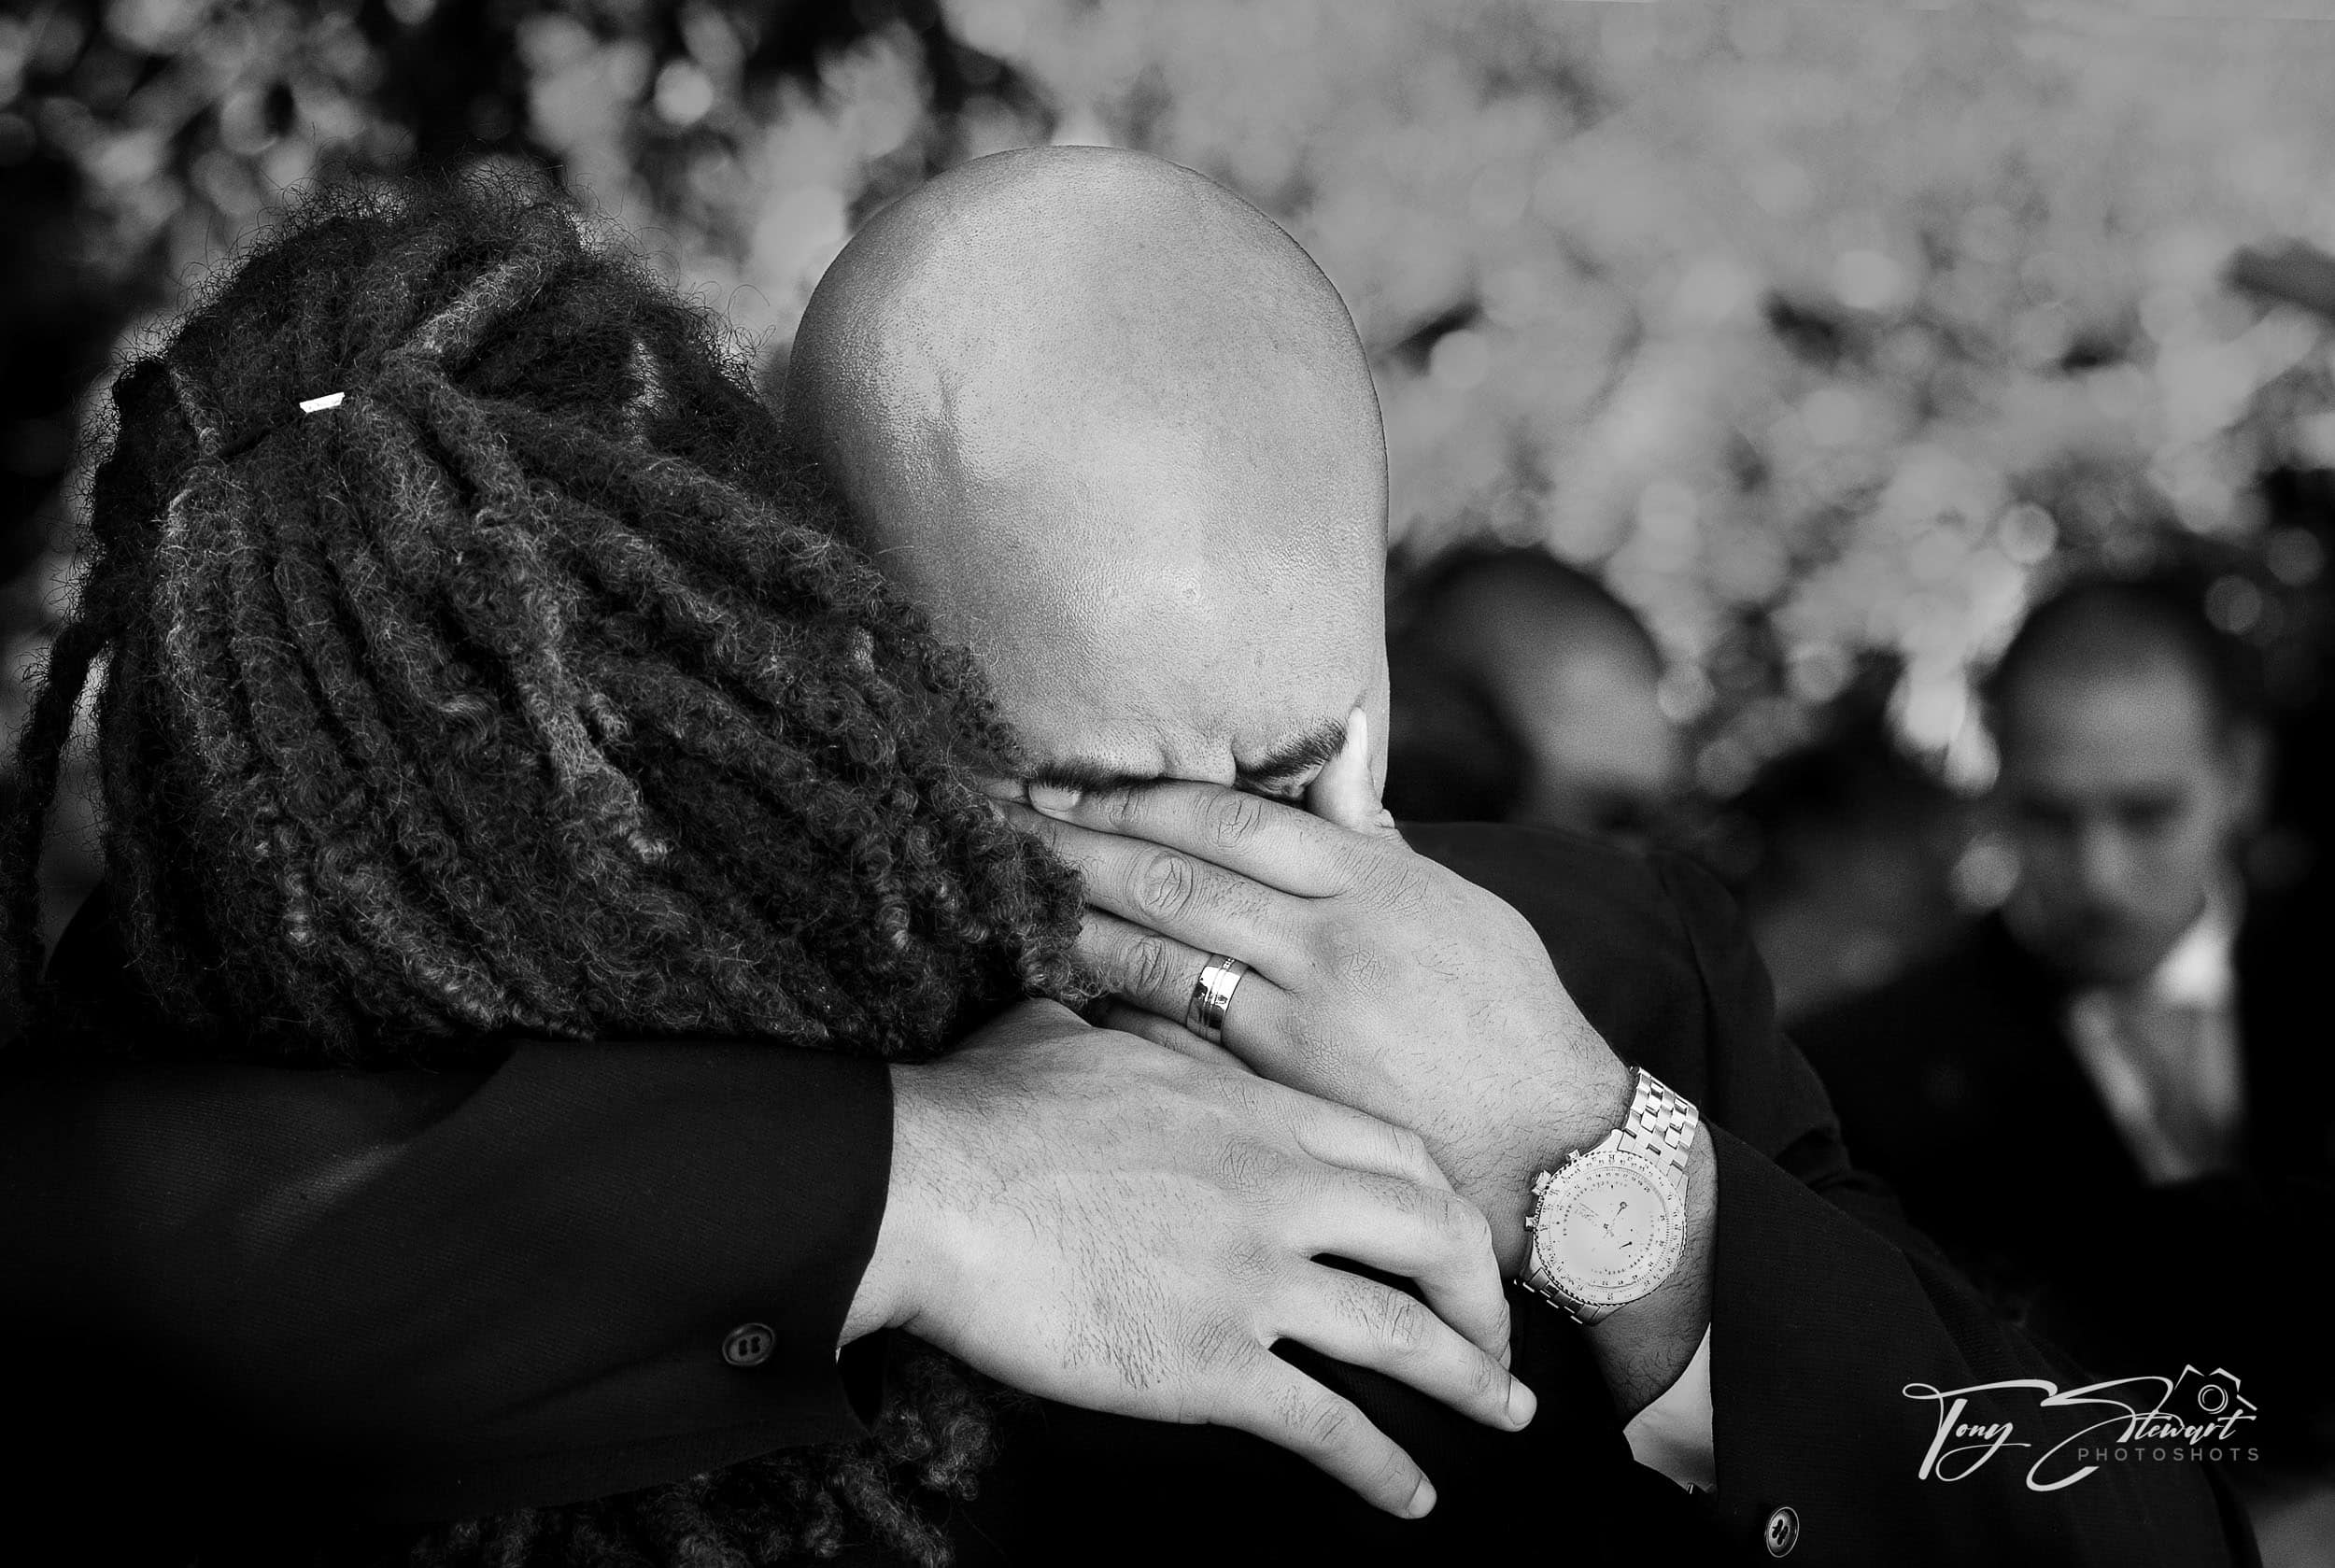 Groom cries and is comforted by best man during wedding.